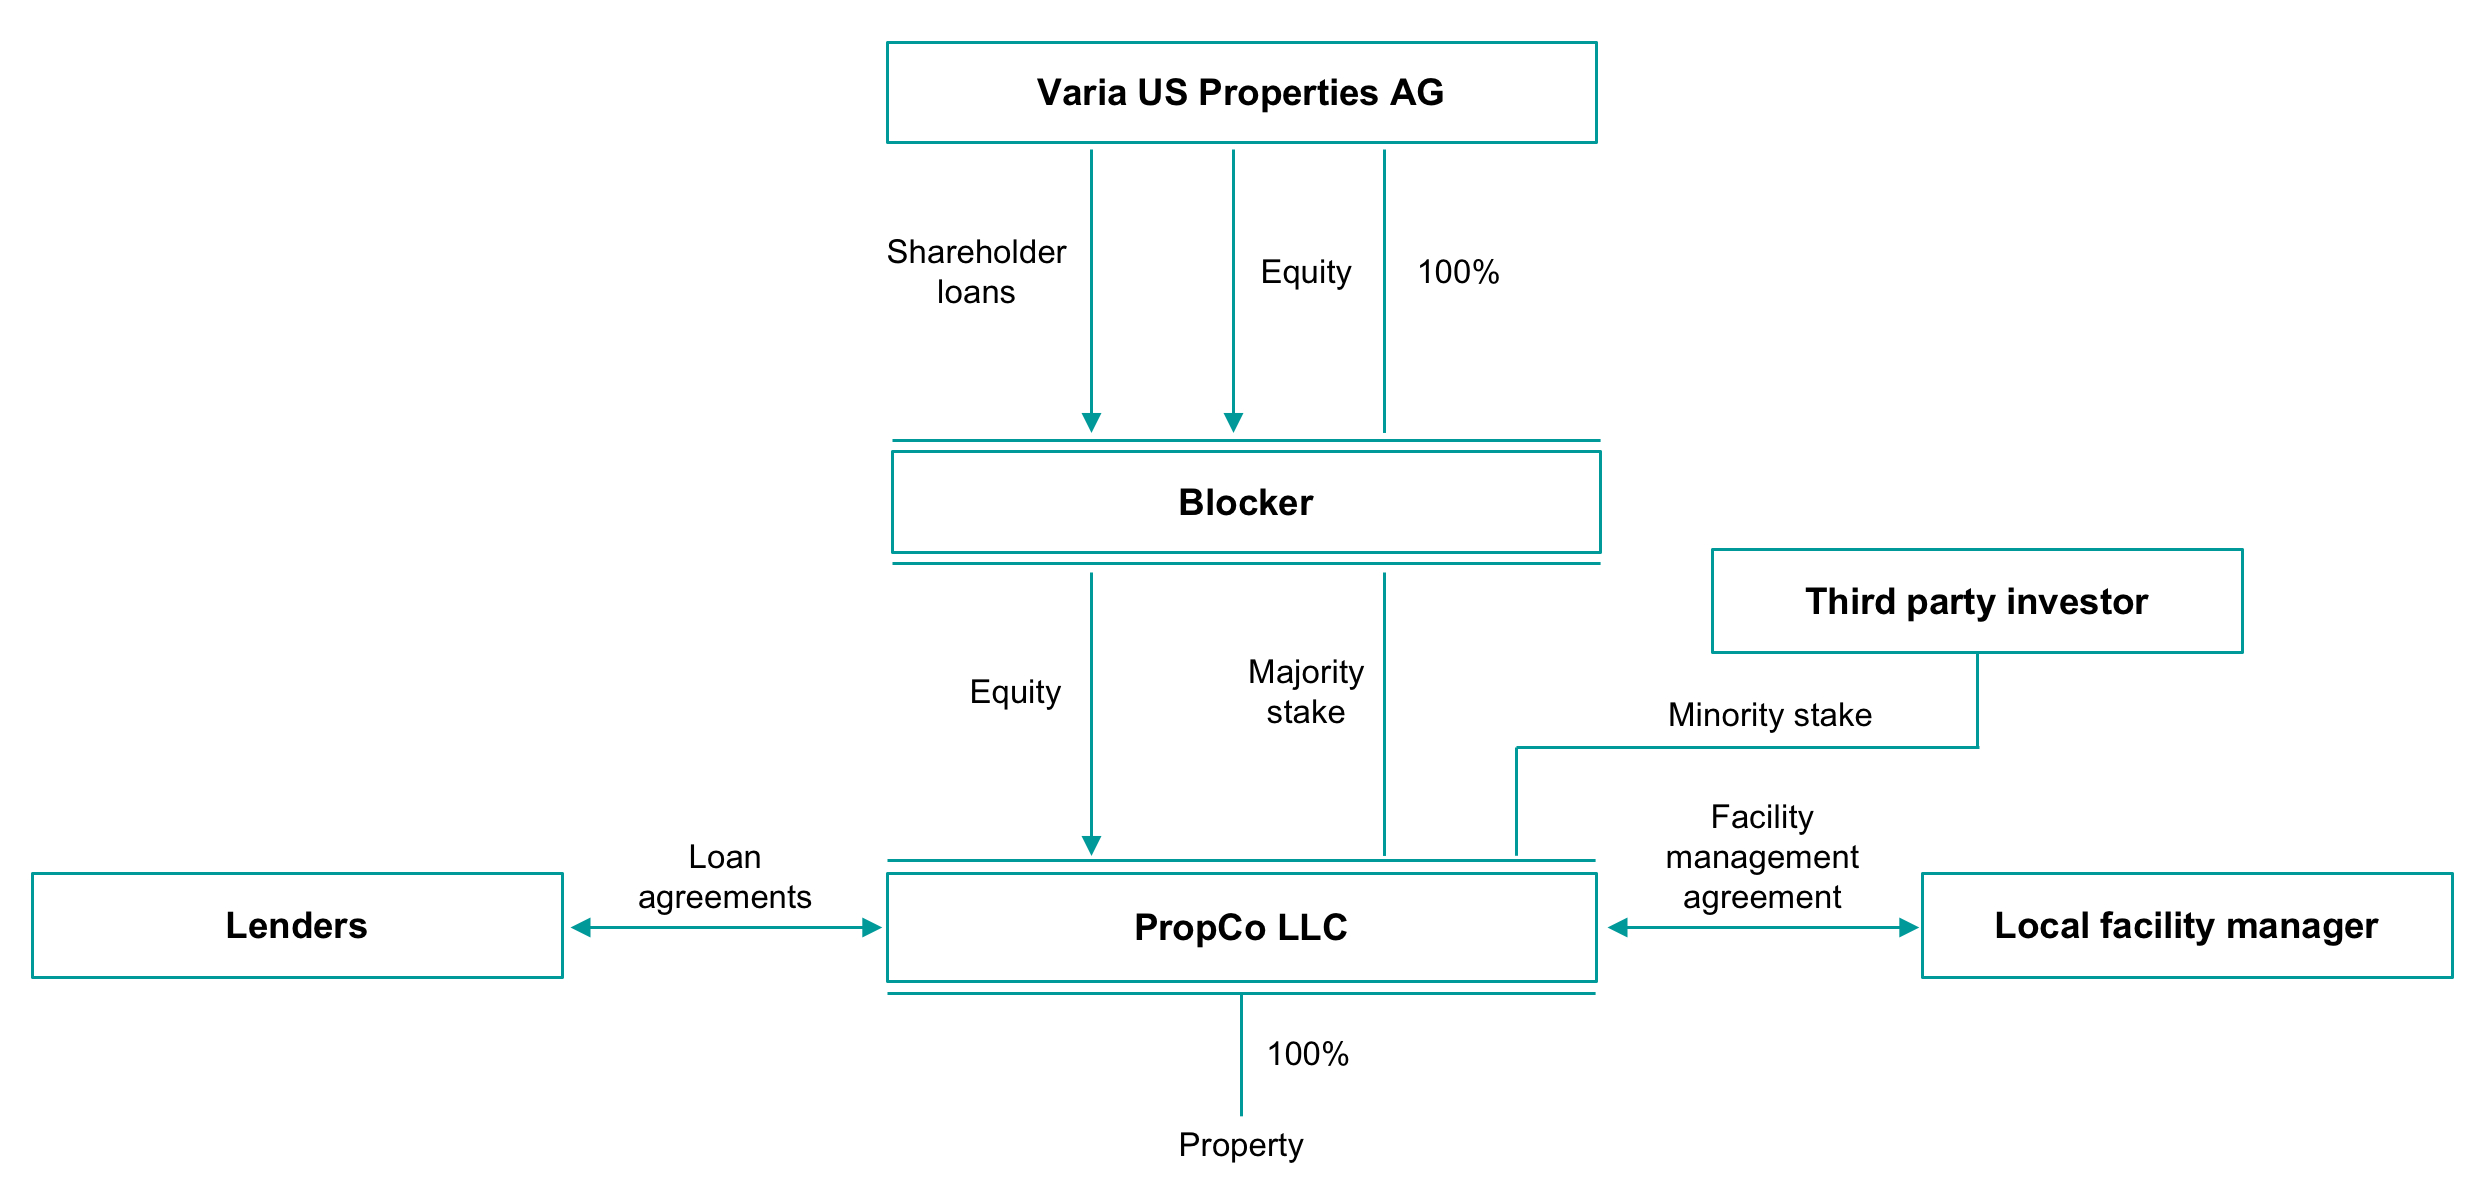 Investment Management Agreement Company Background Varia Us Properties